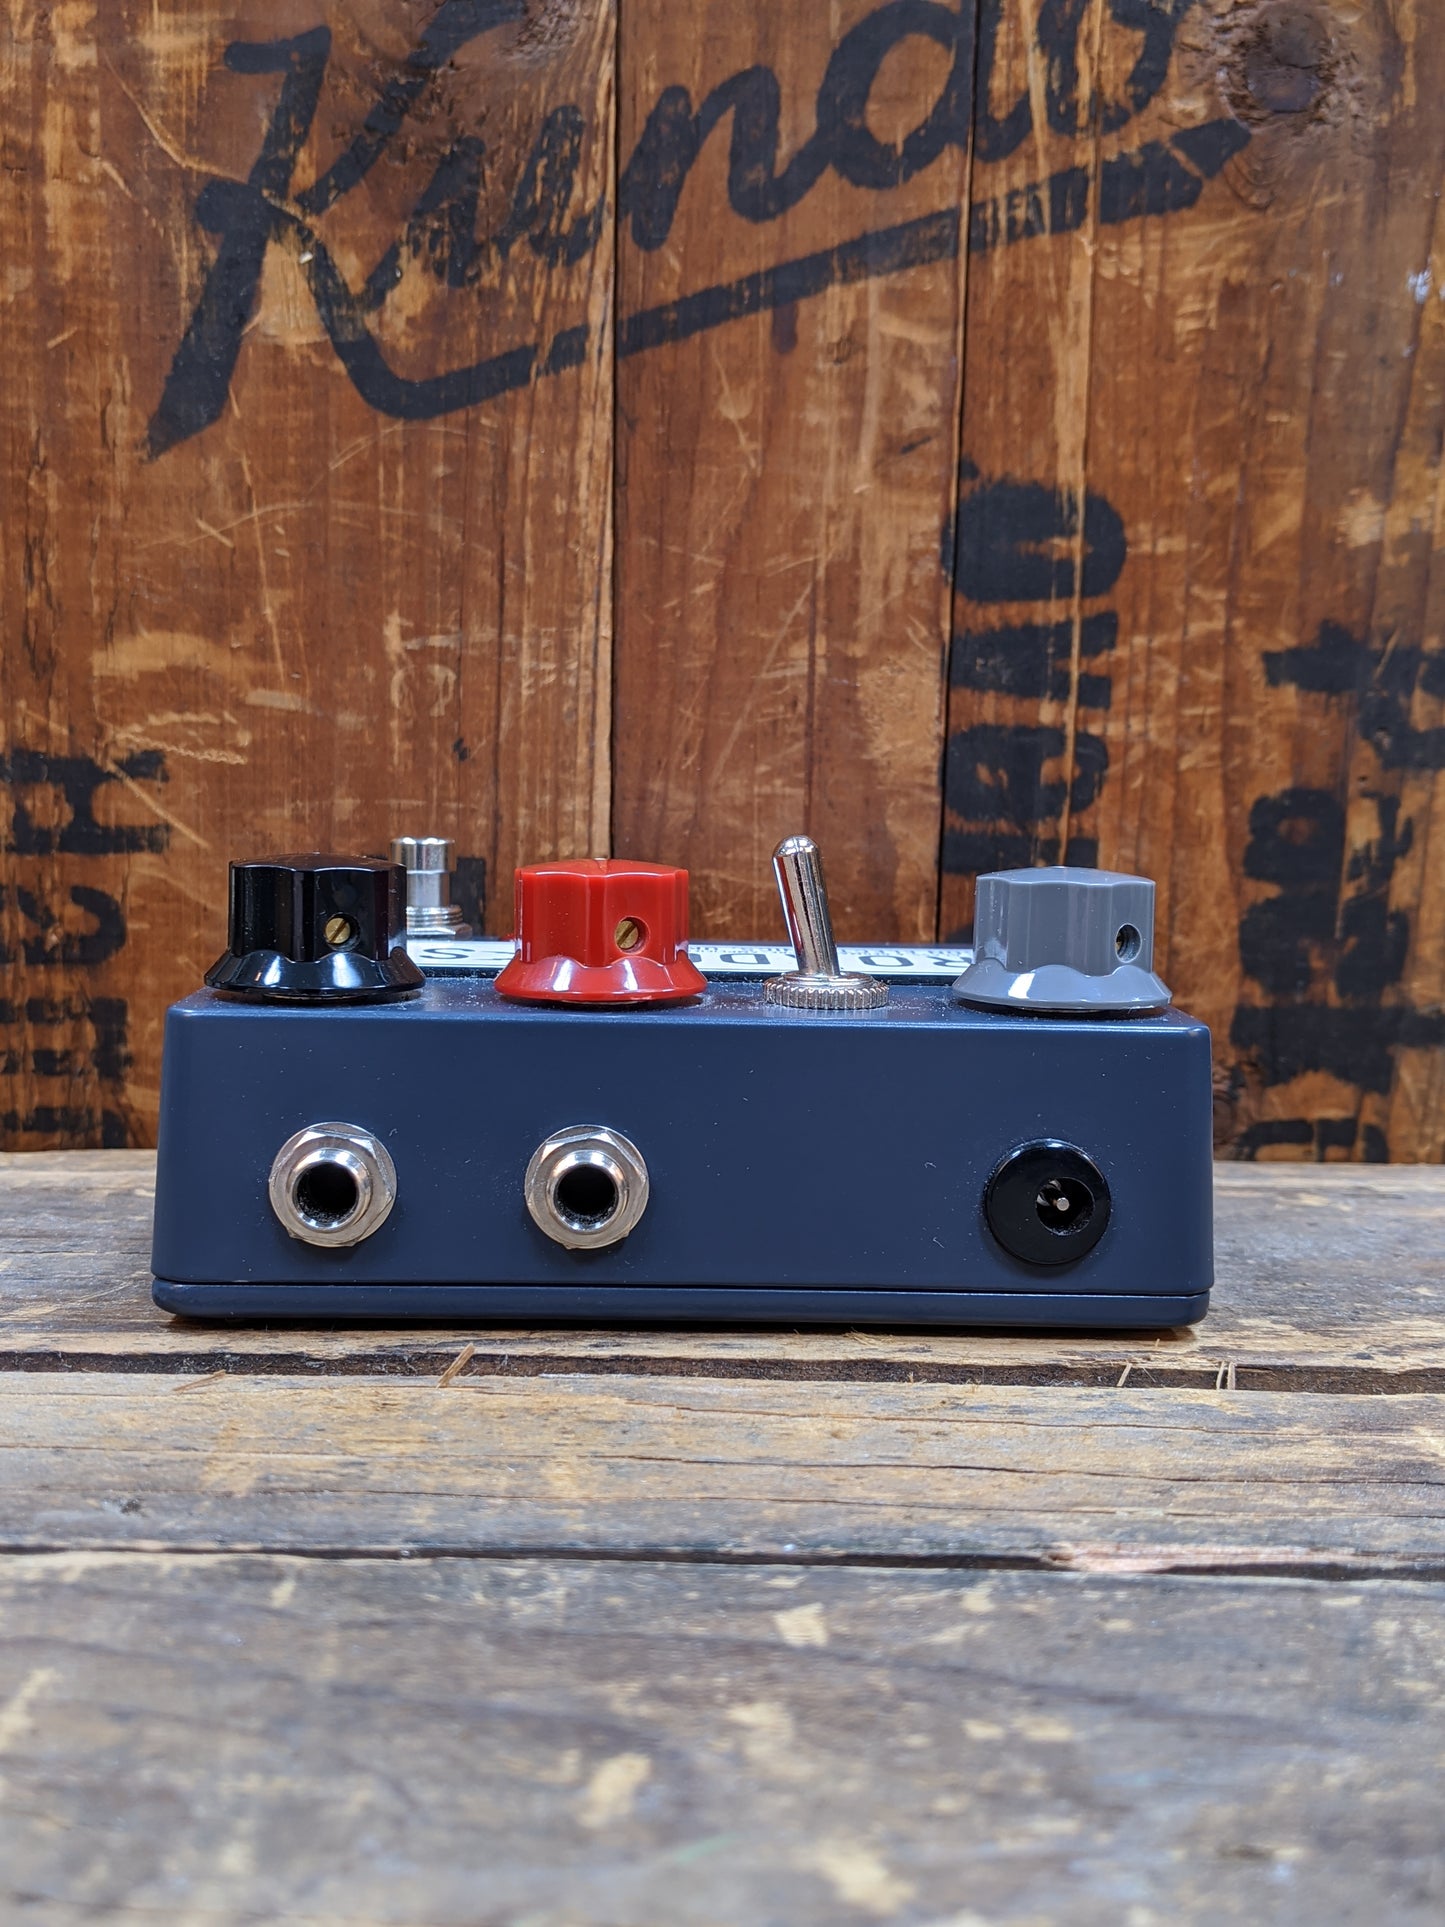 Hudson Broadcast Preamp Overdrive Pedal